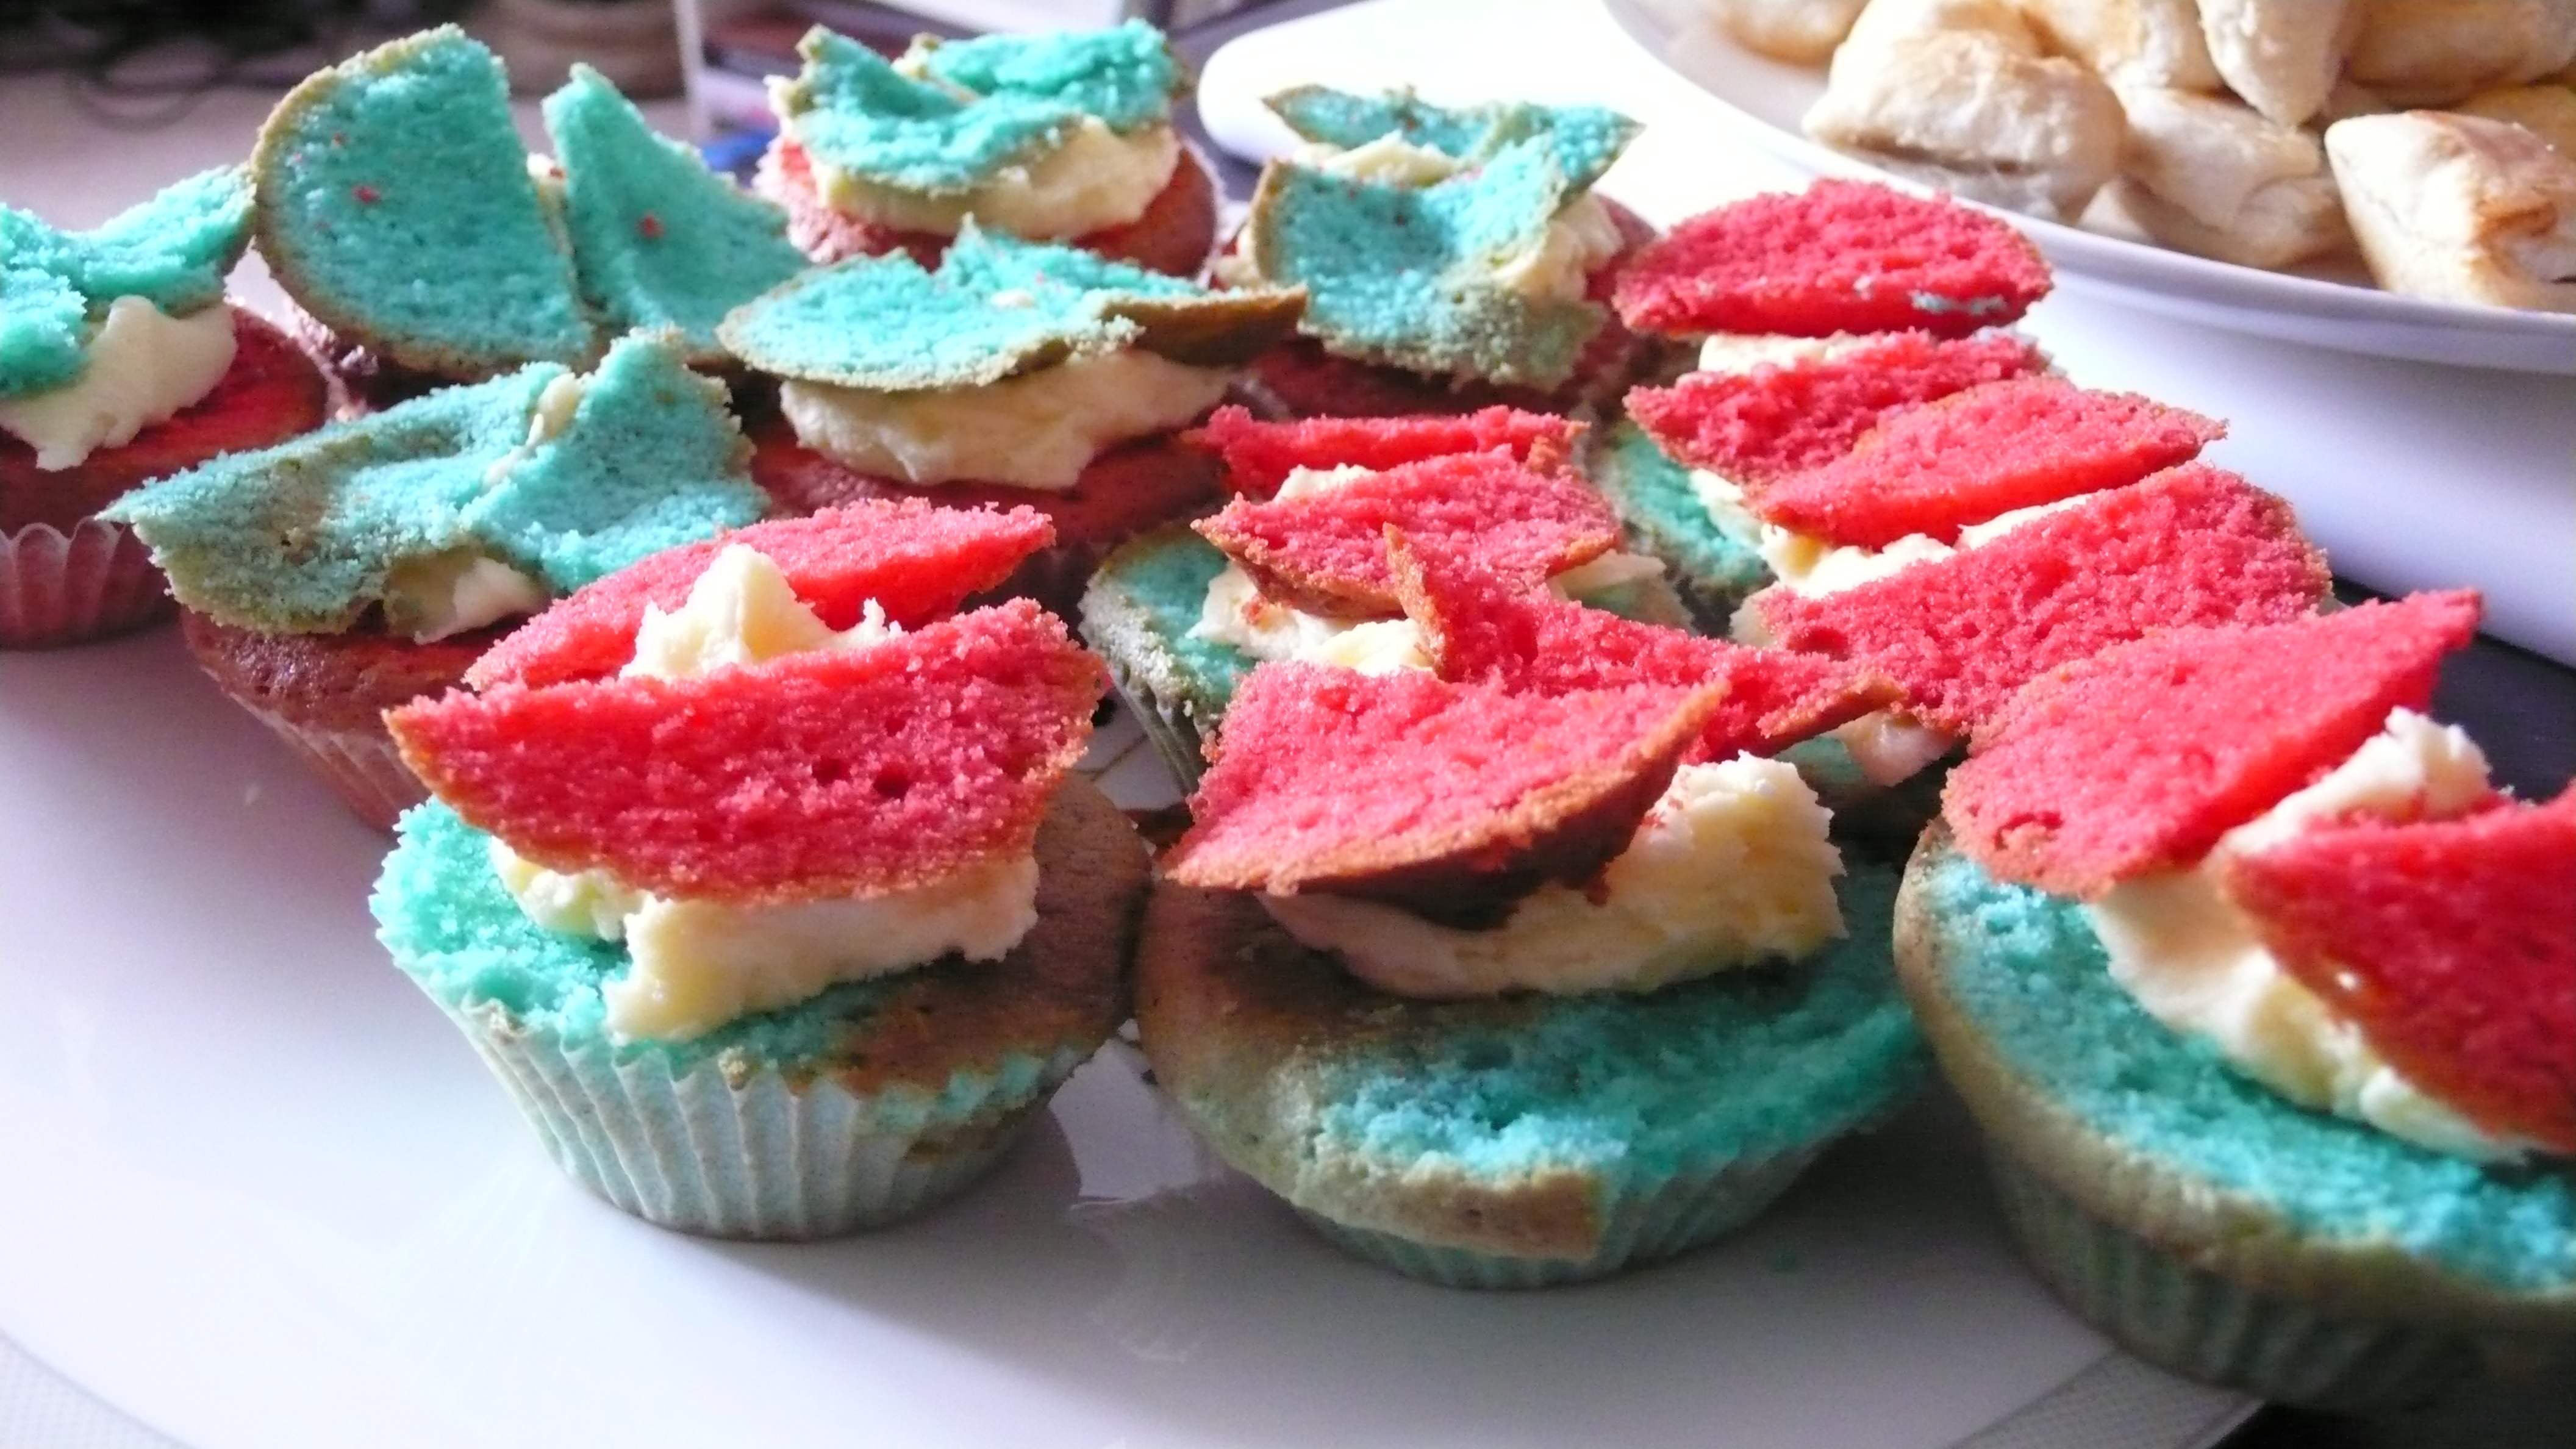 Red white and blue cup cakes (at least in theory)